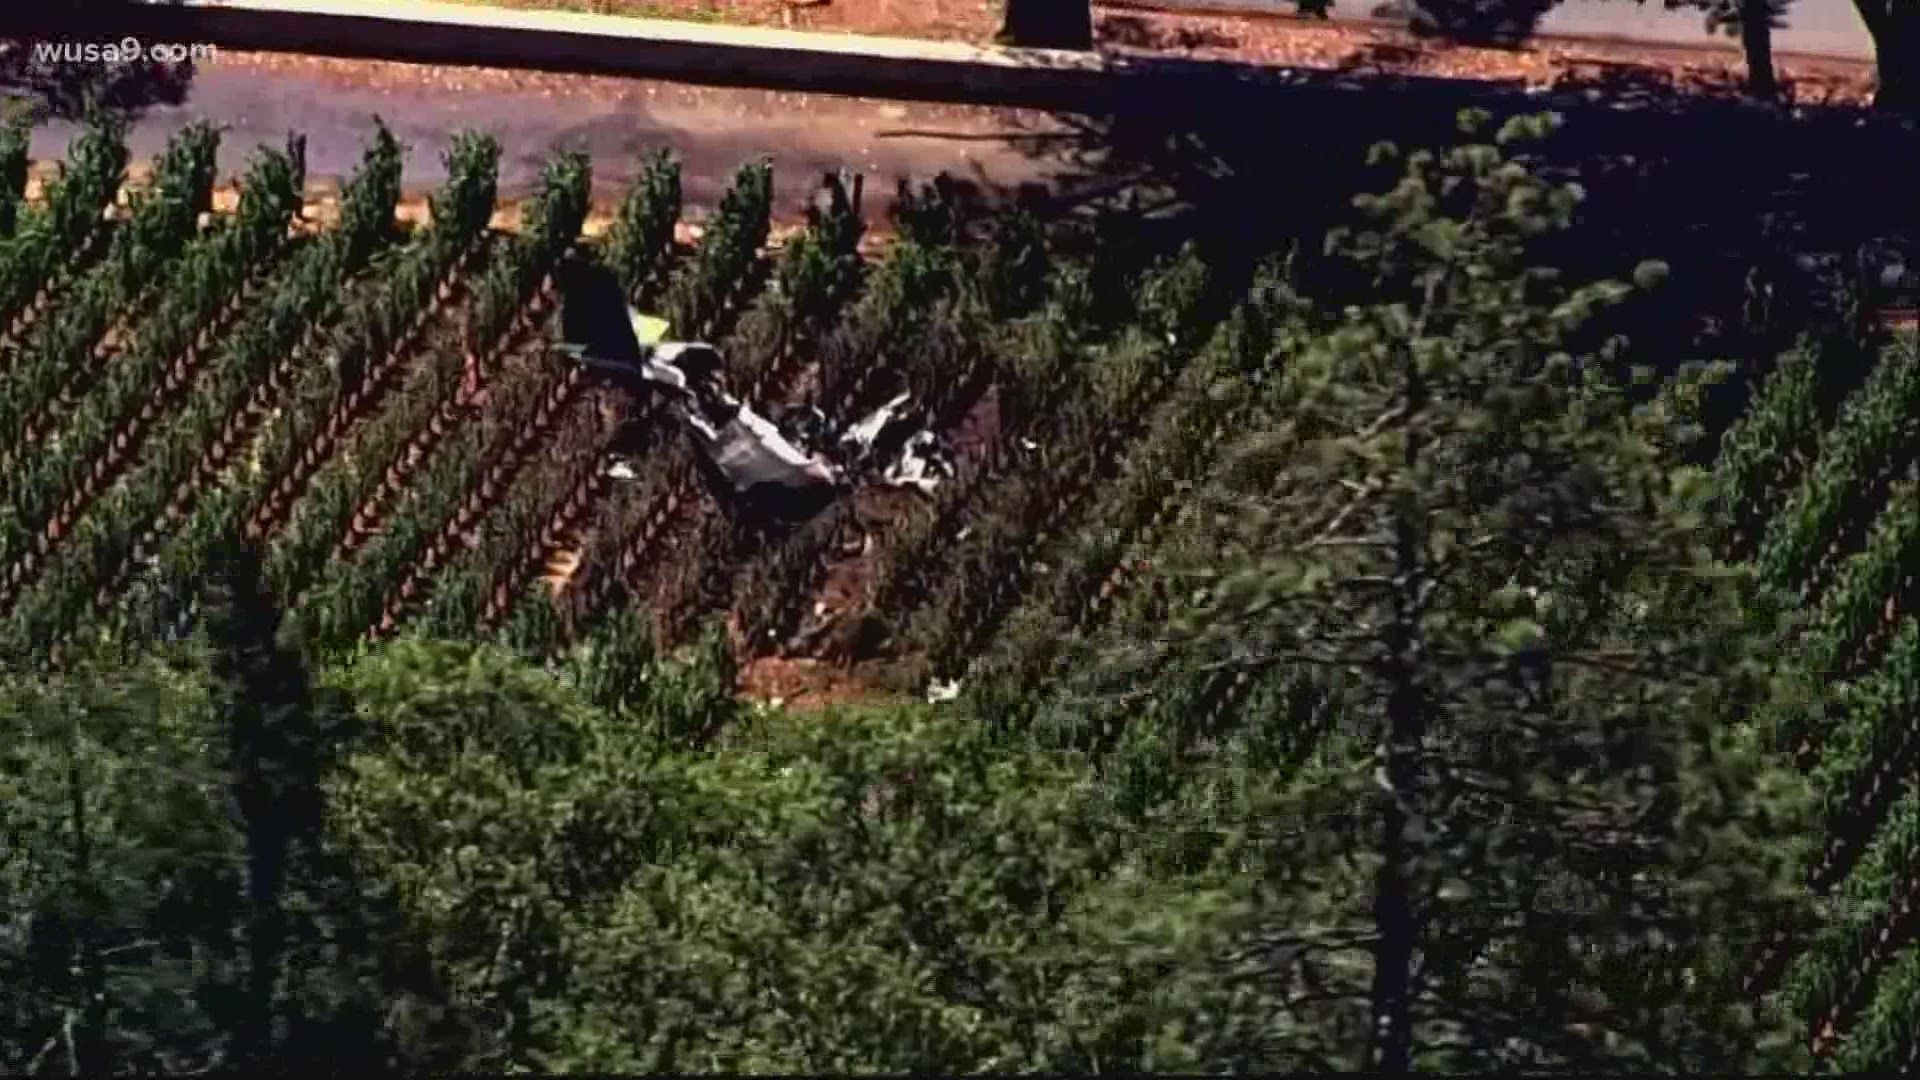 The plane crashed into a vineyard in Napa County, according to the Napa County Sheriff's Office.